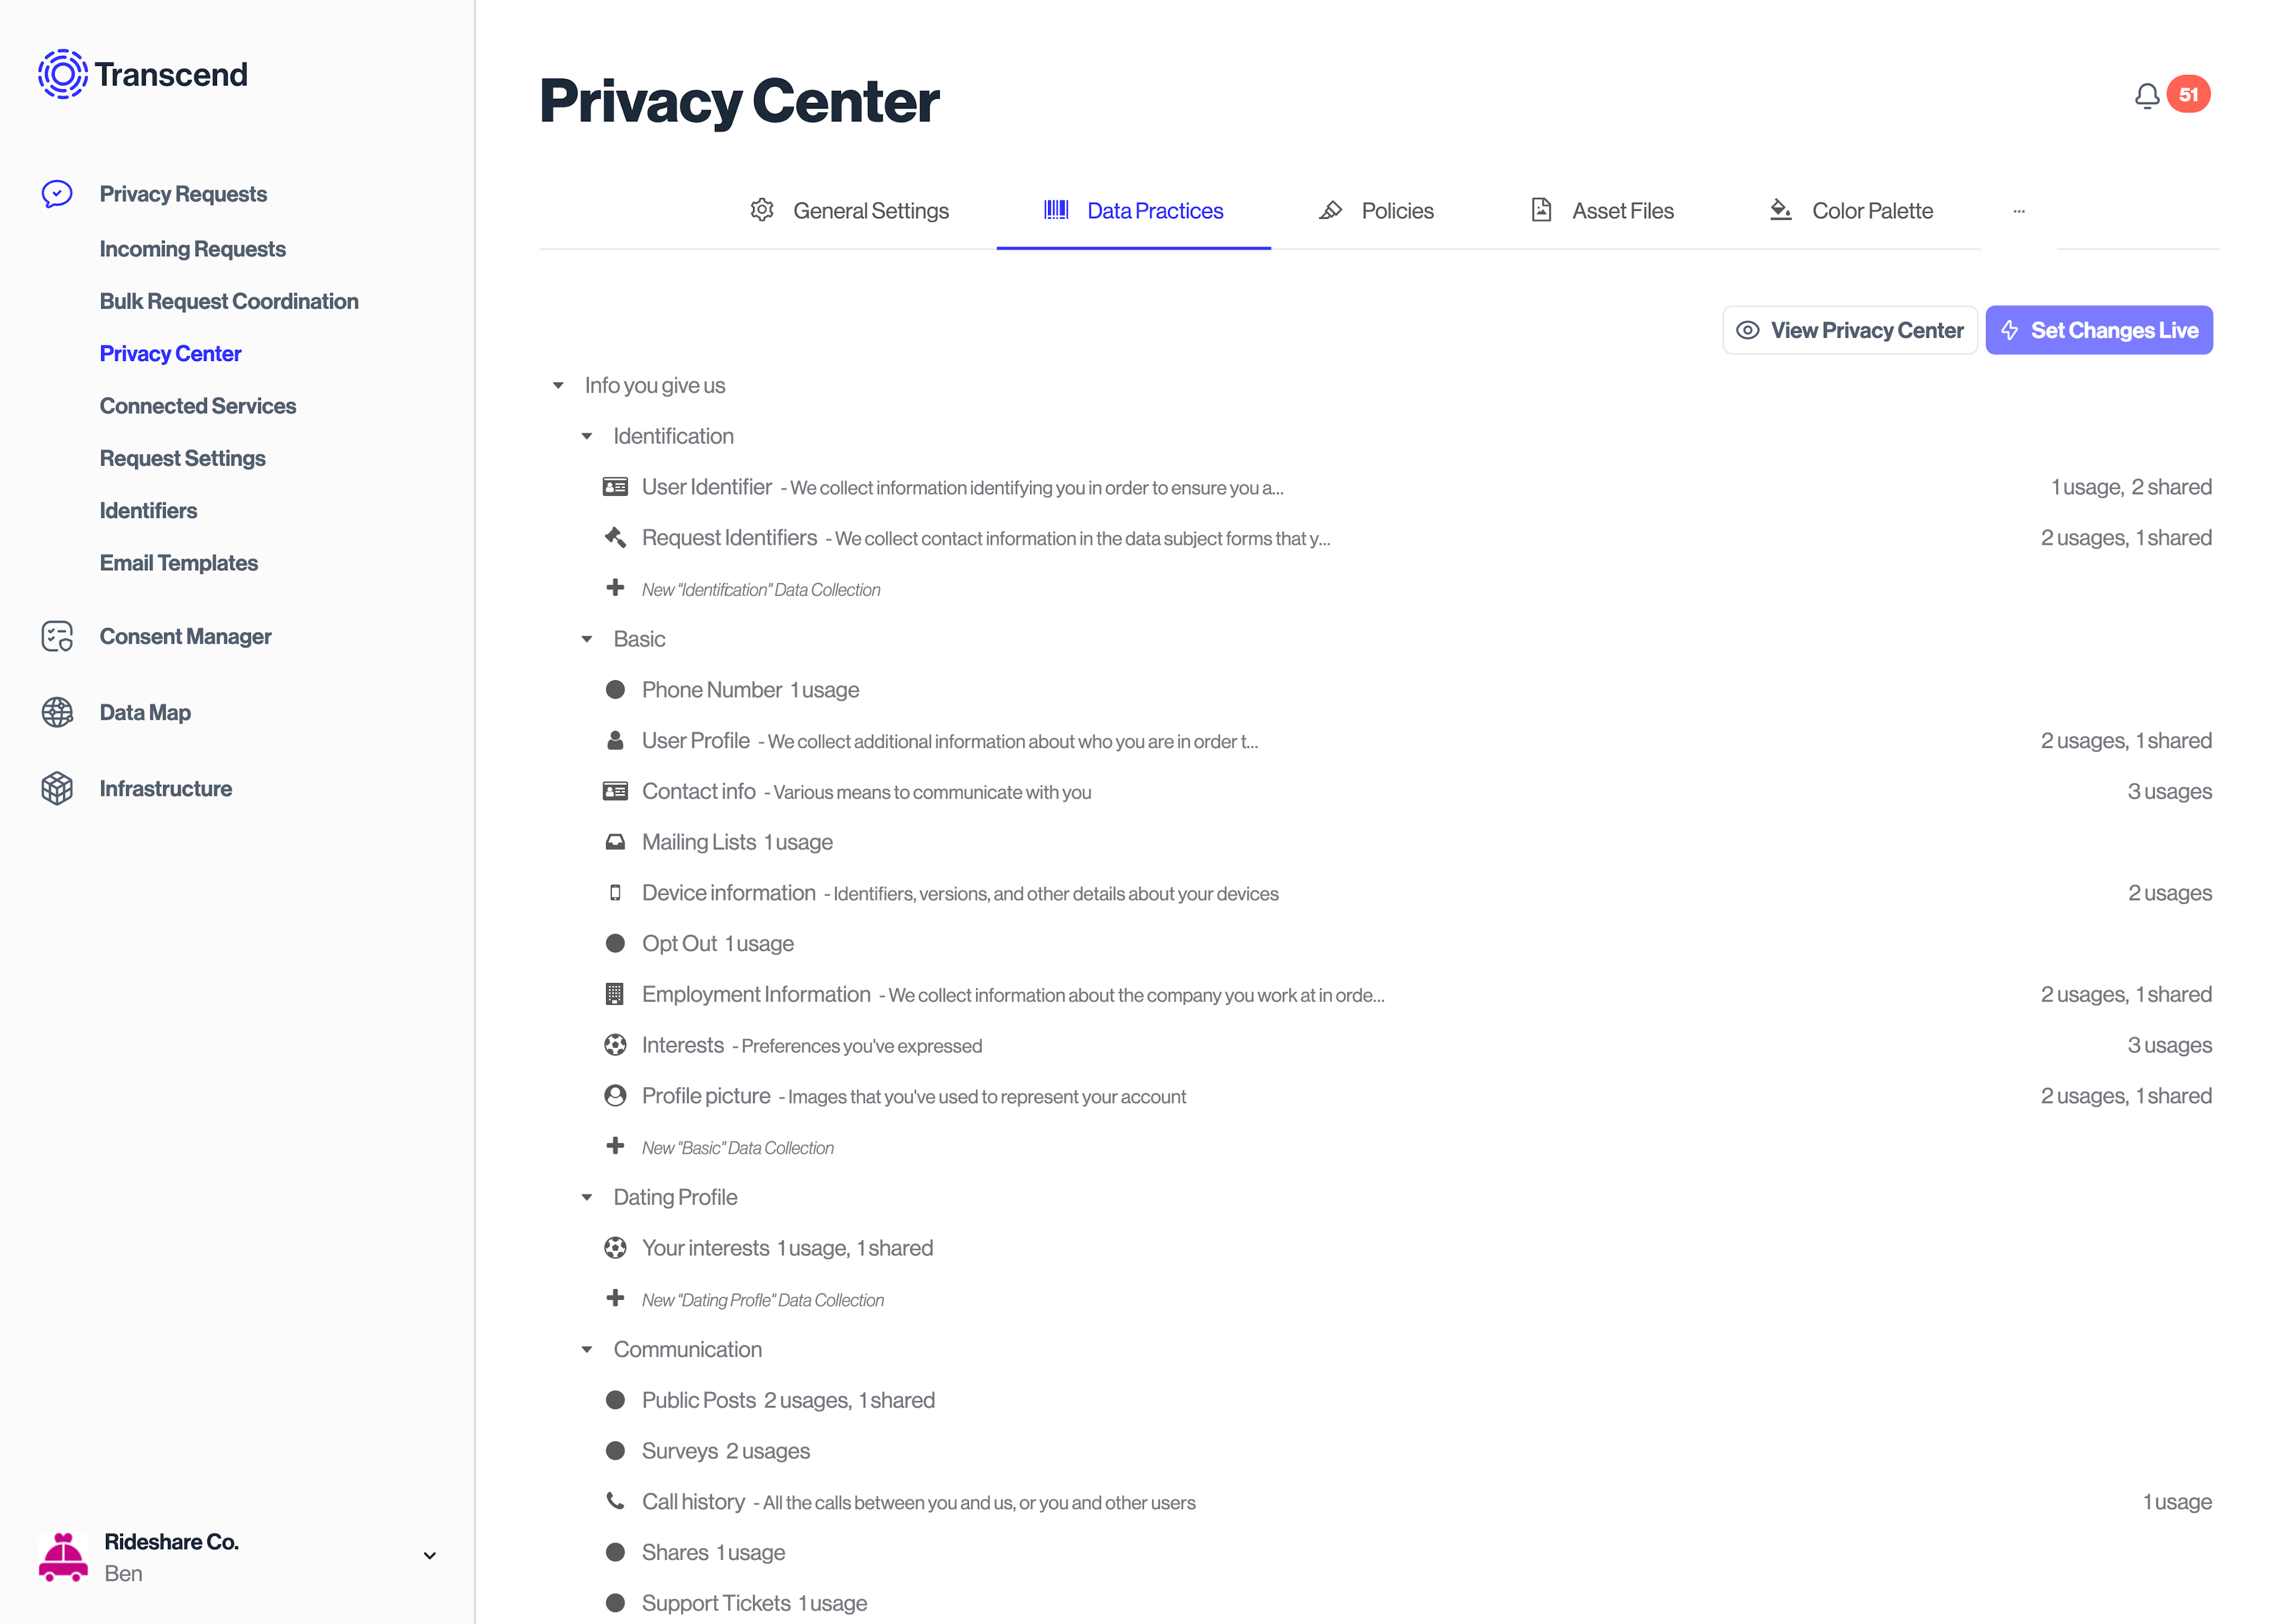 The Privacy Center's configuration page, showing the data practices tab.